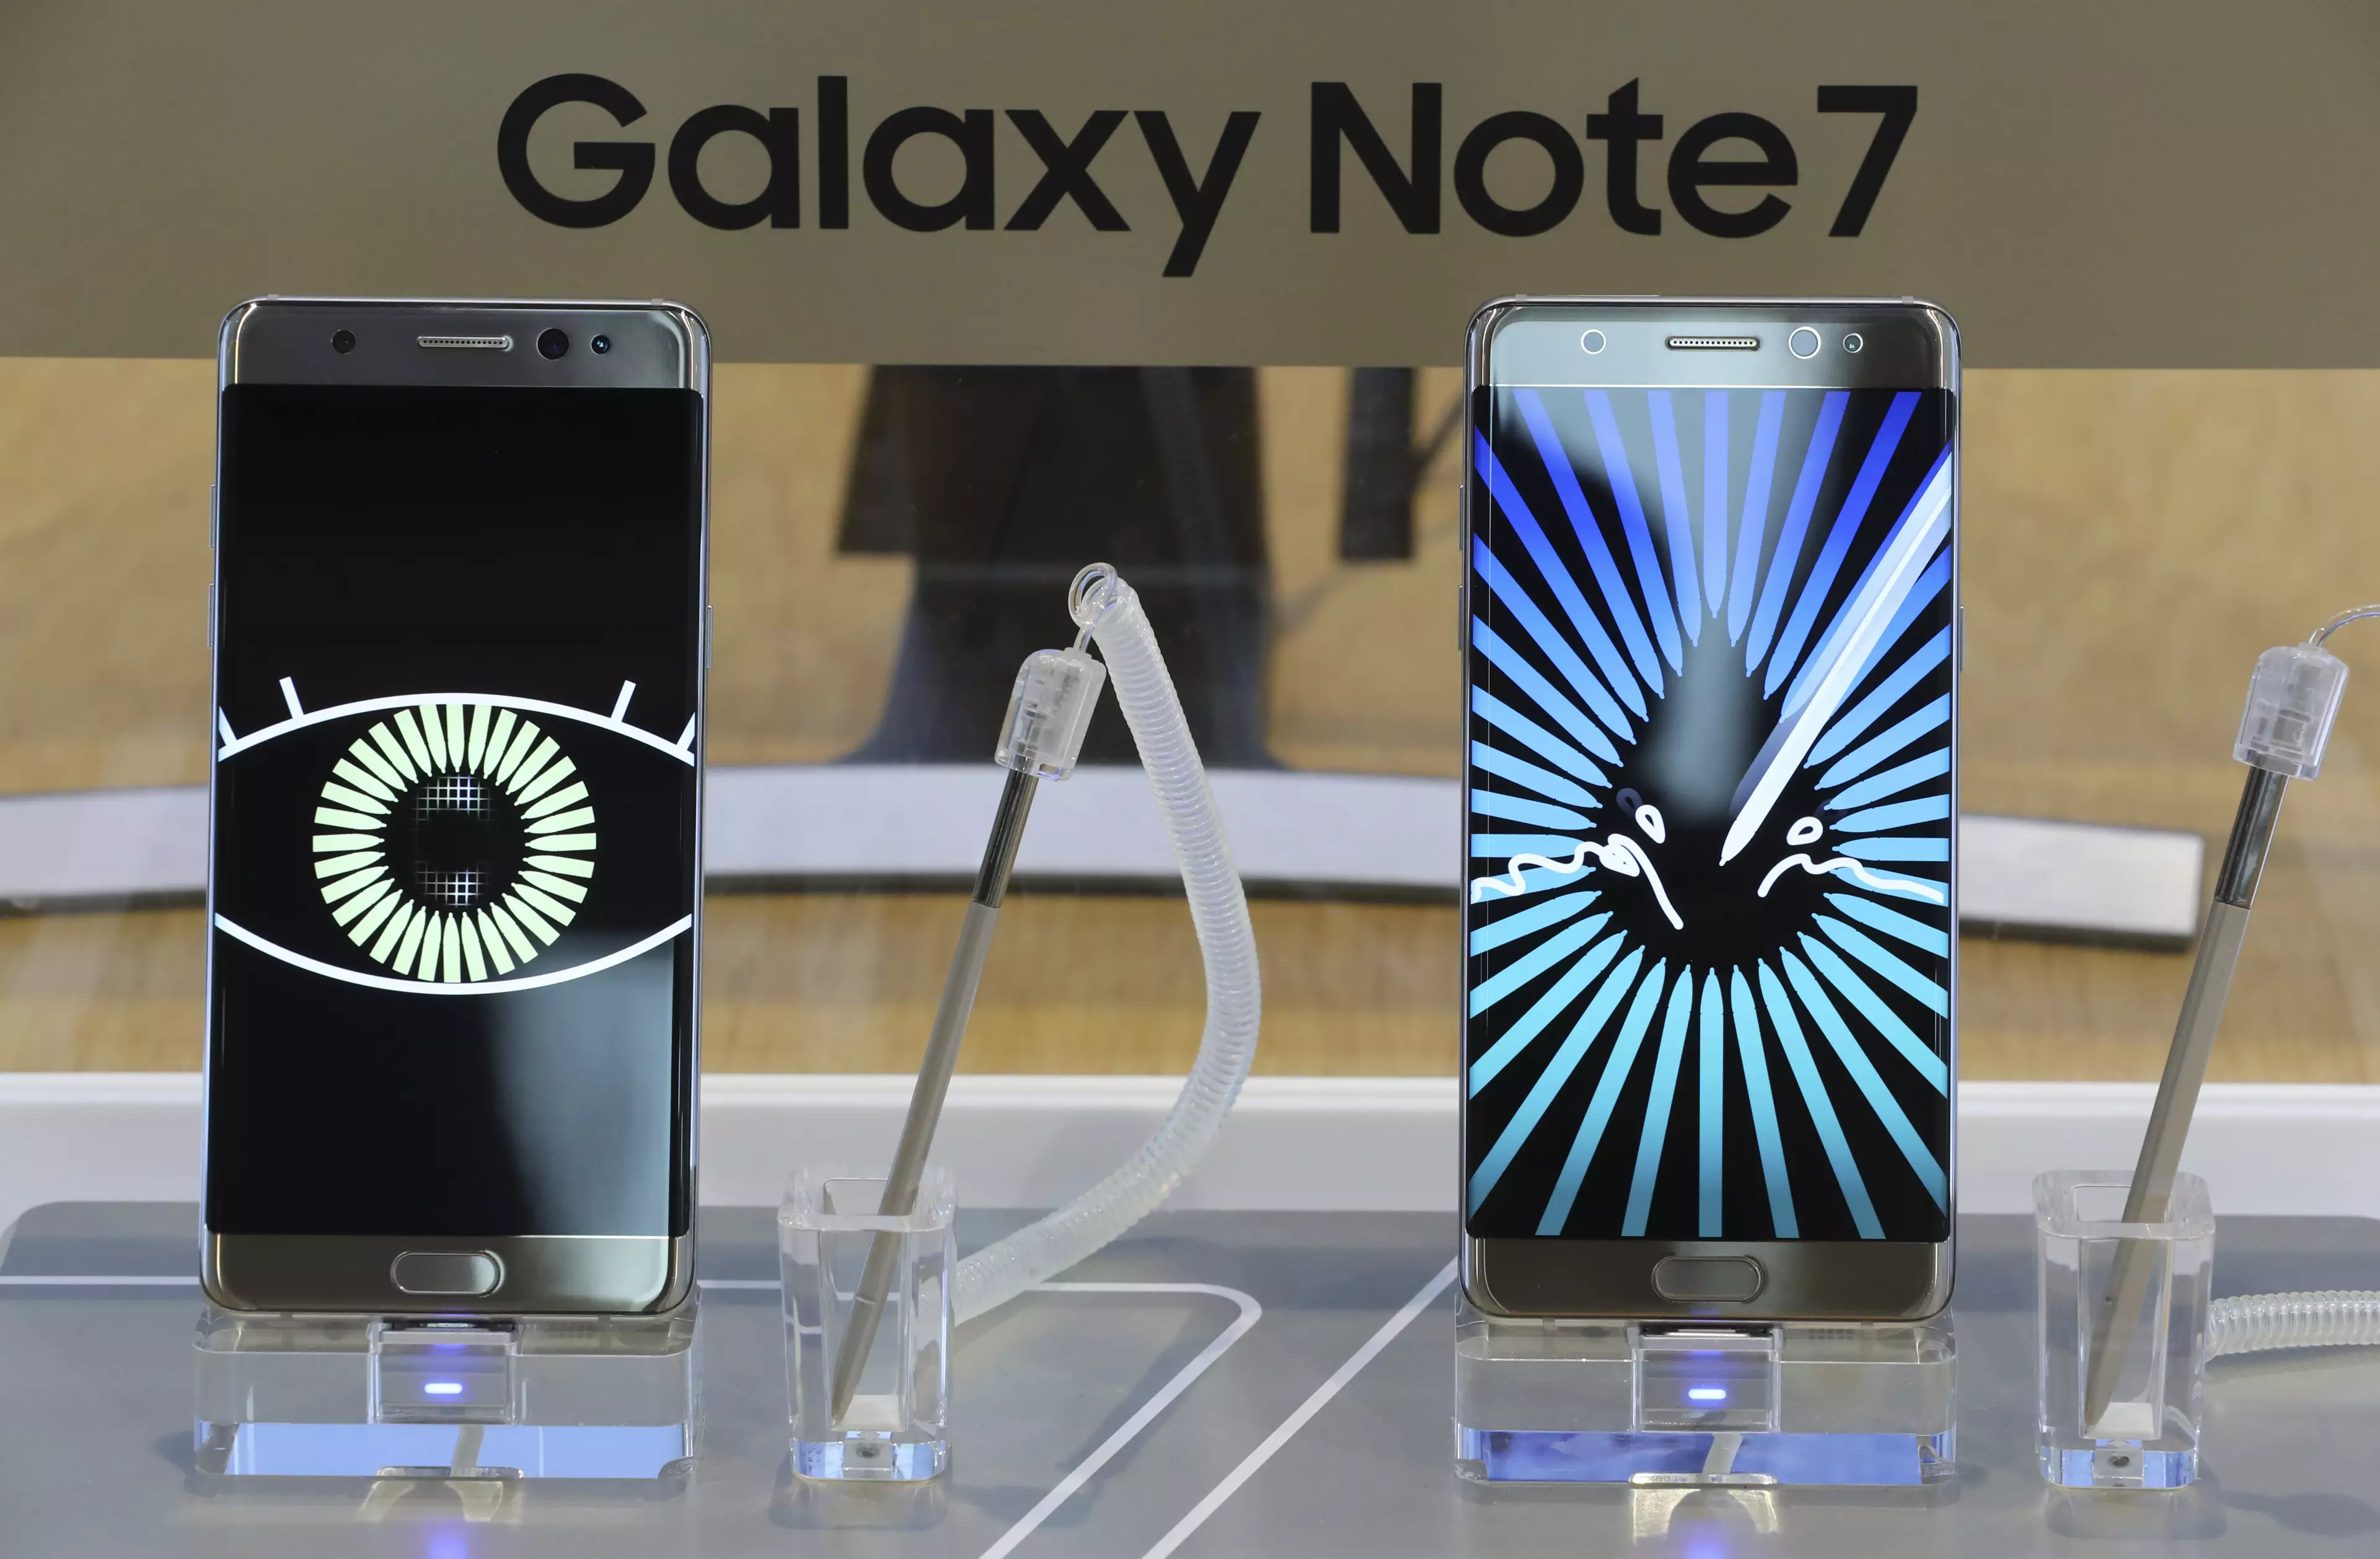 Samsung Is Going To Lose A Lot Of Money After Discontinuing The Galaxy Note 7